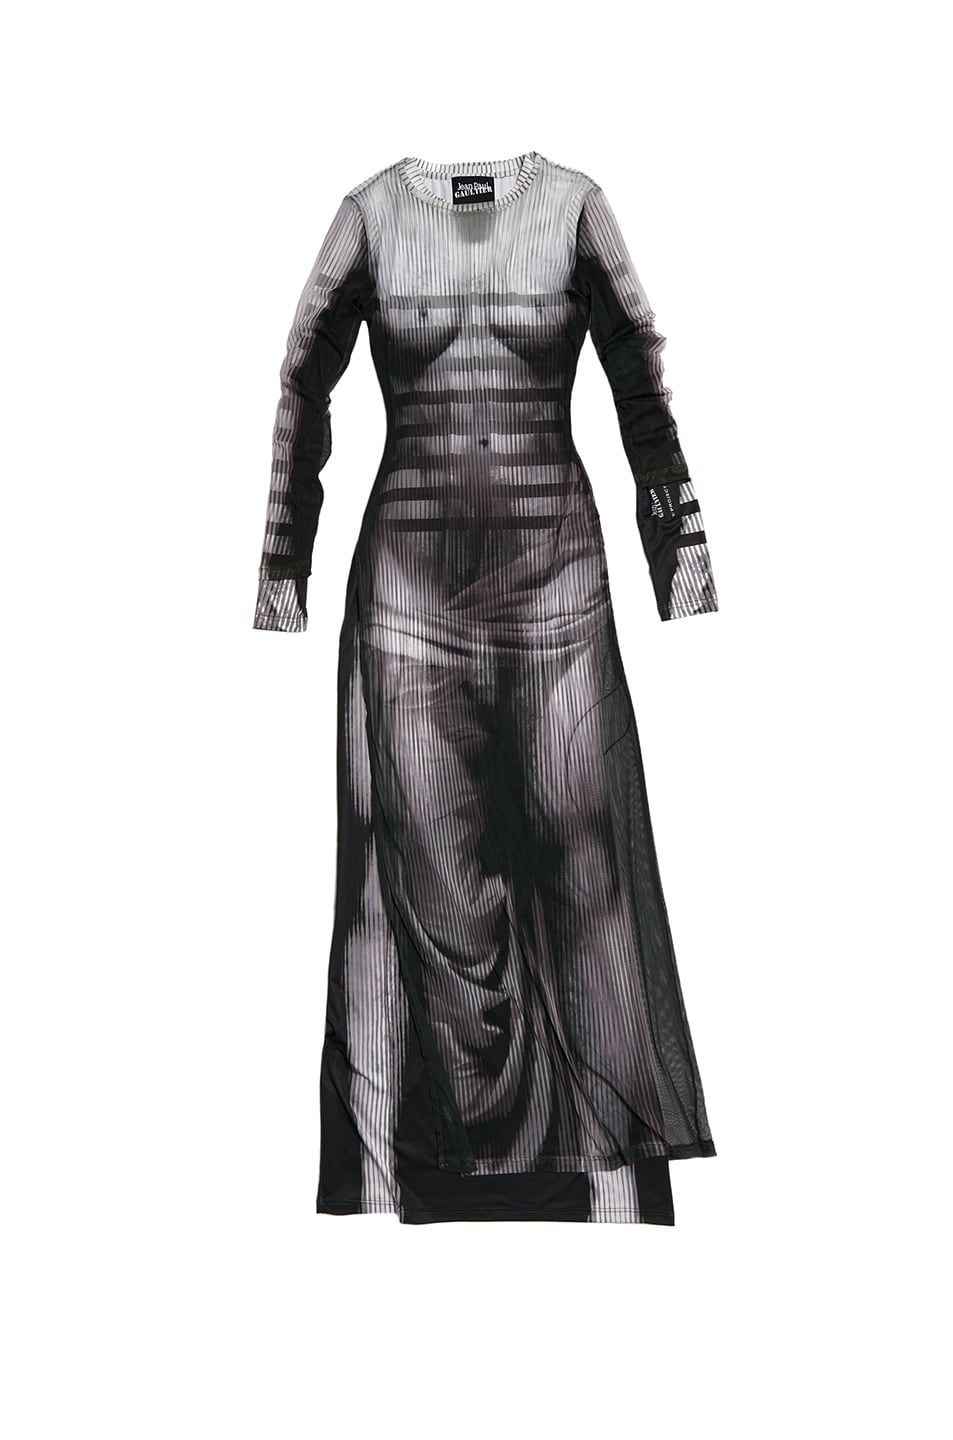 Image 1 of Y/Project x Jean-Paul Gaultier Body Morph Mesh Cover Dress in Black & White